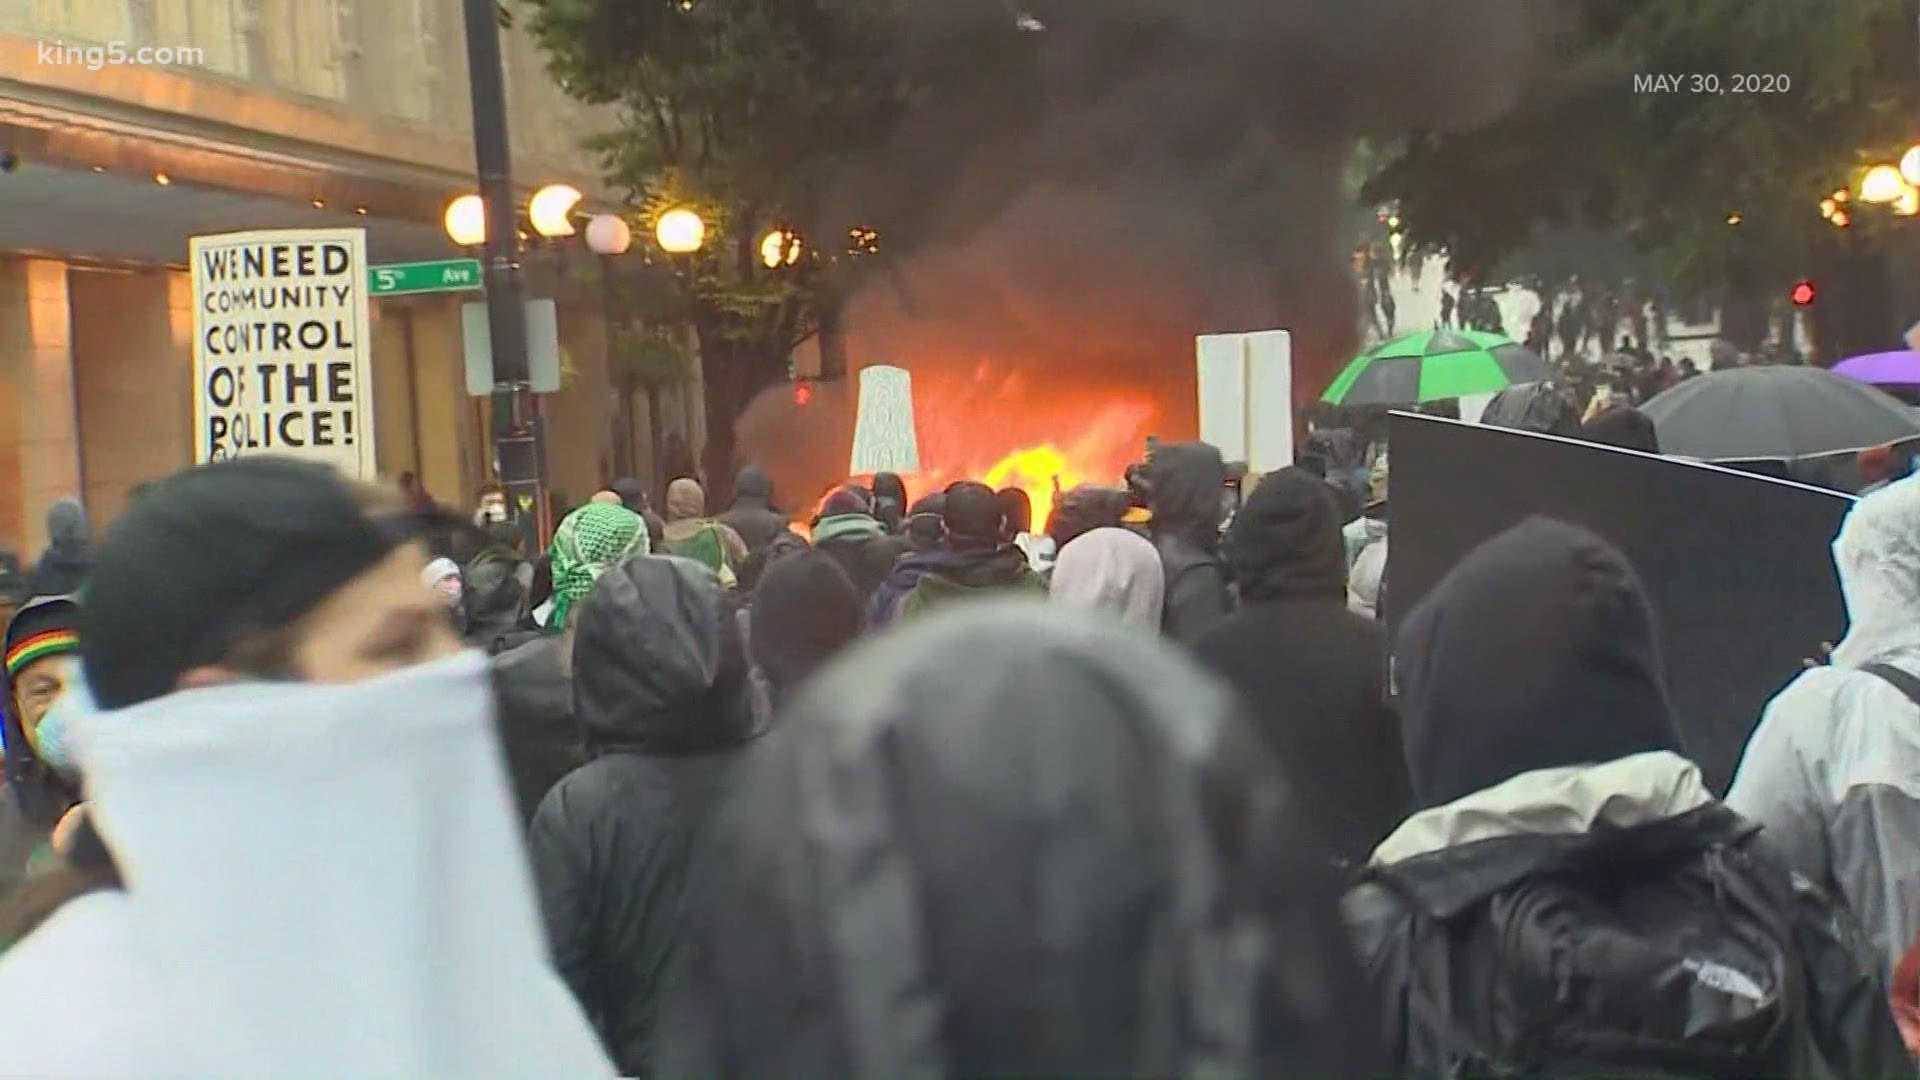 The media organizations also include KIRO-TV, KOMO-TV, KCPQ-TV and The Seattle Times. Seattle police are looking for higher resolution footage from the May 30 riots.